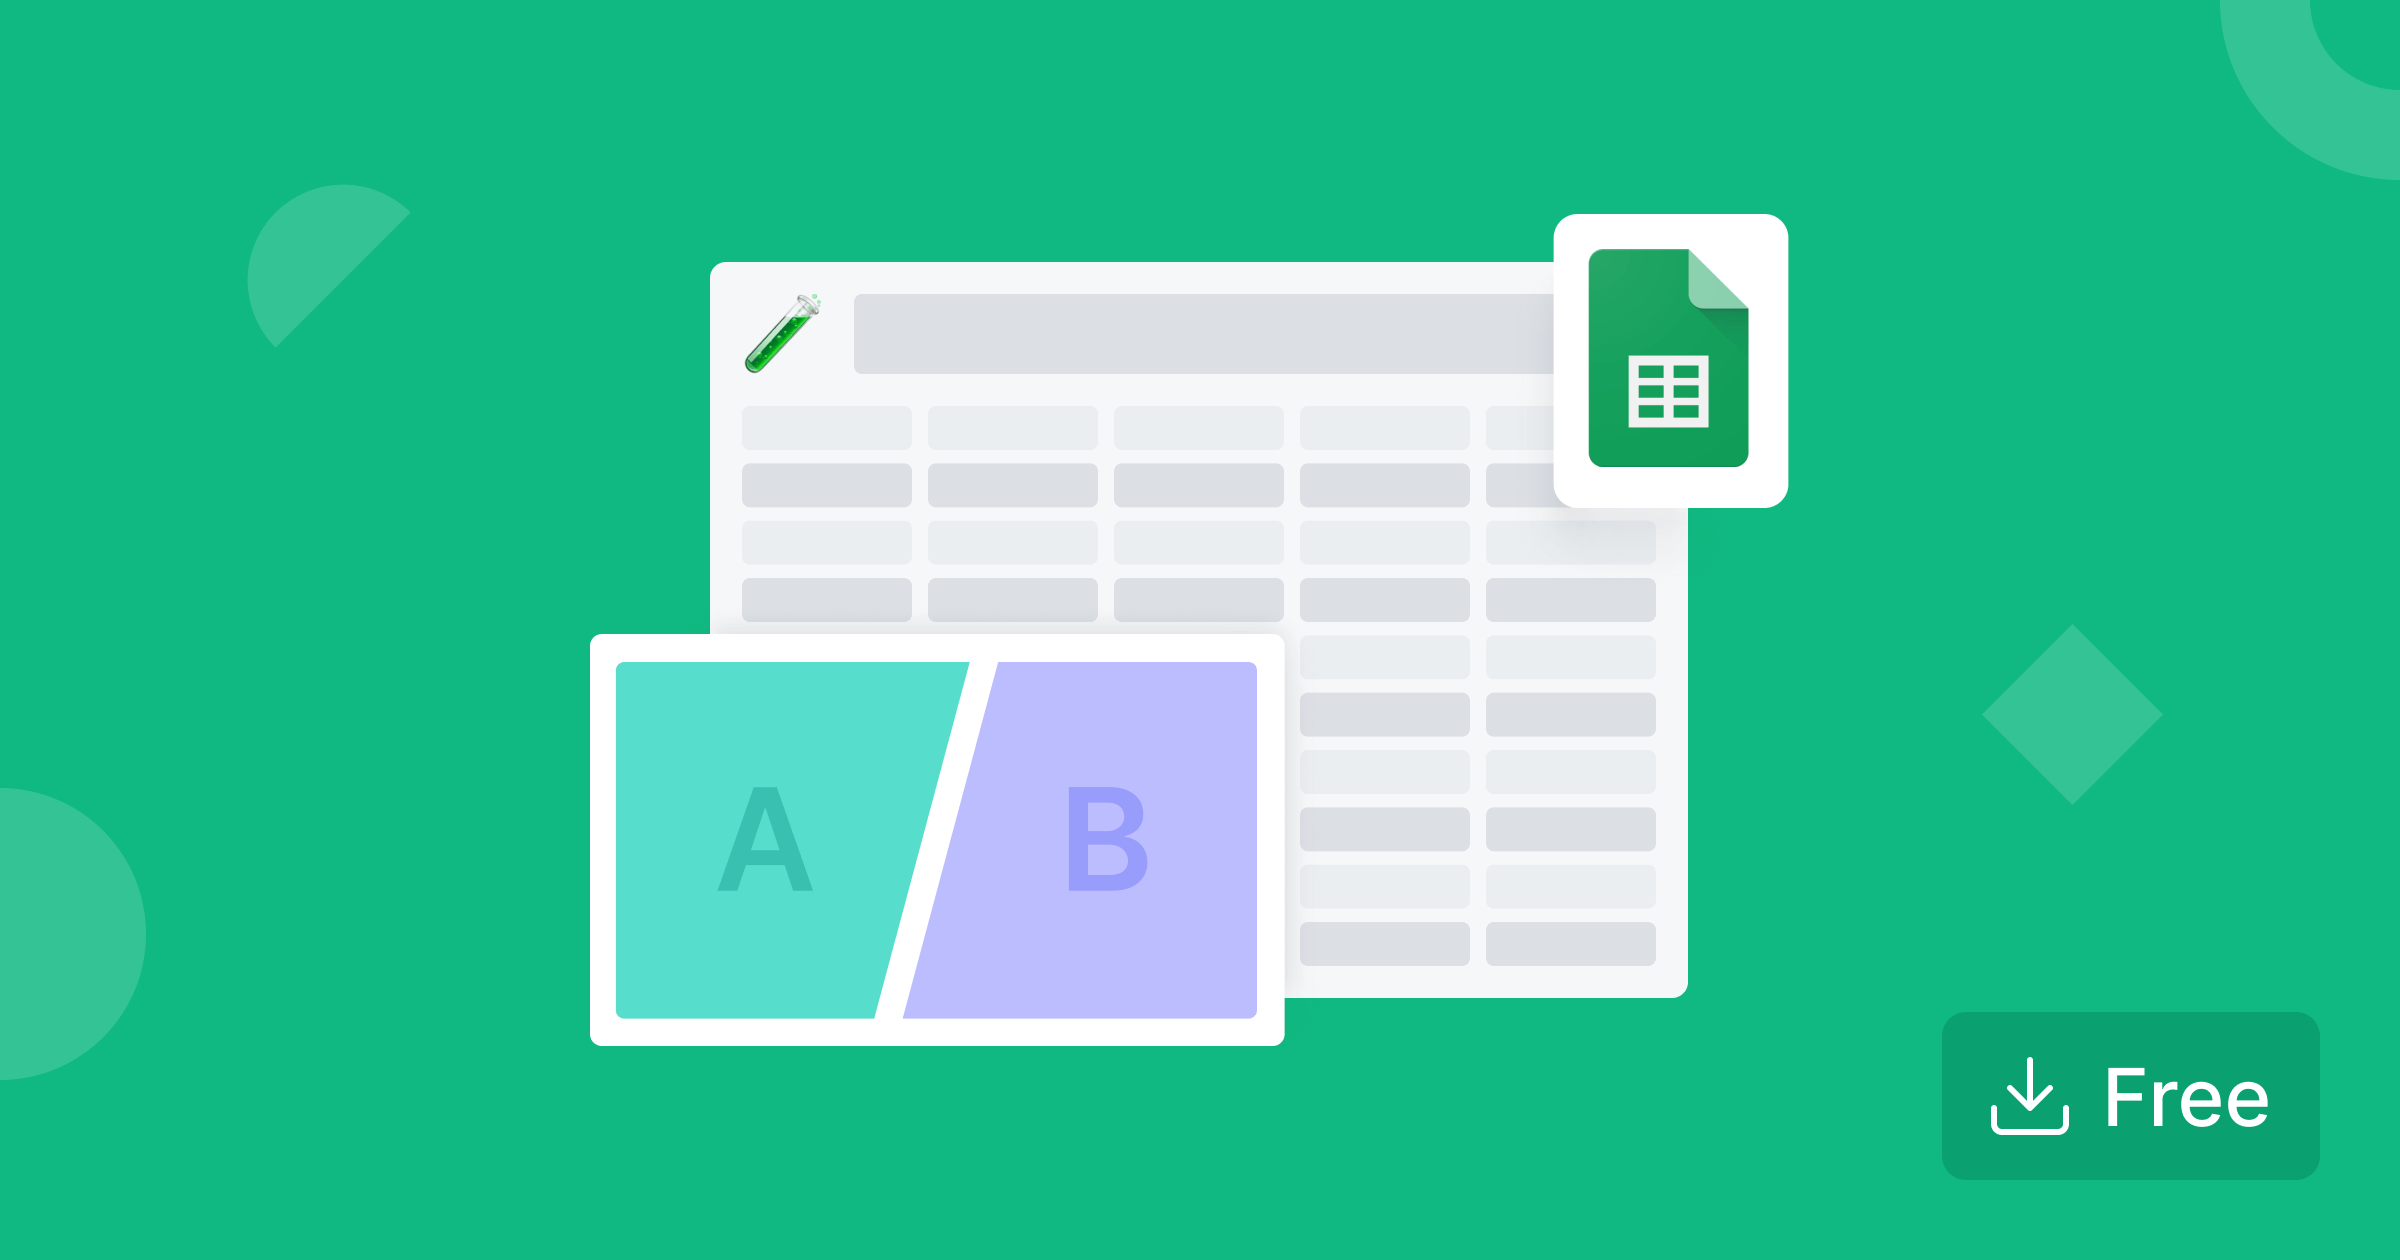 Green image showing a spreadsheet and an AB test representation.